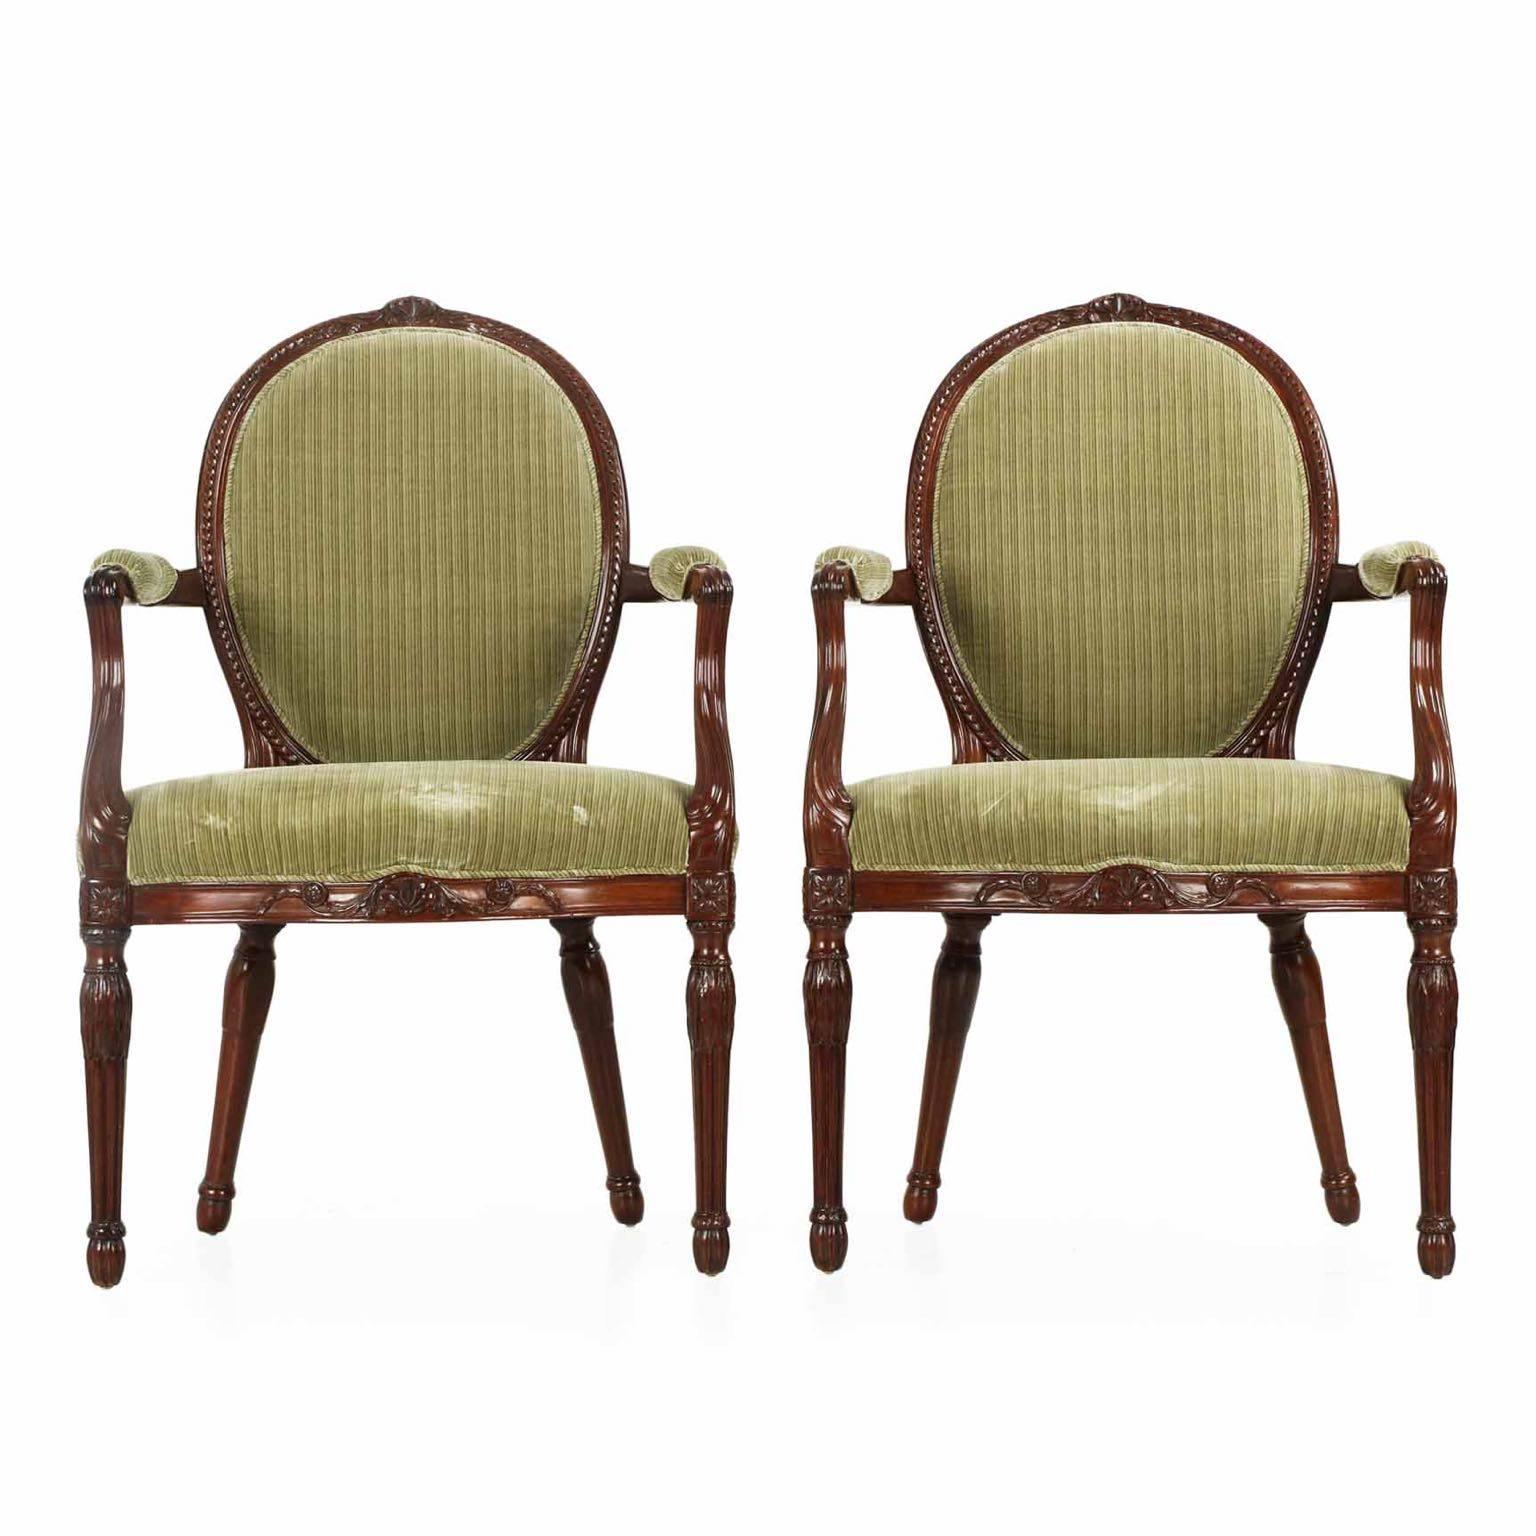 Fine Pair of George III Carved Mahogany Armchairs, Late 18th Century